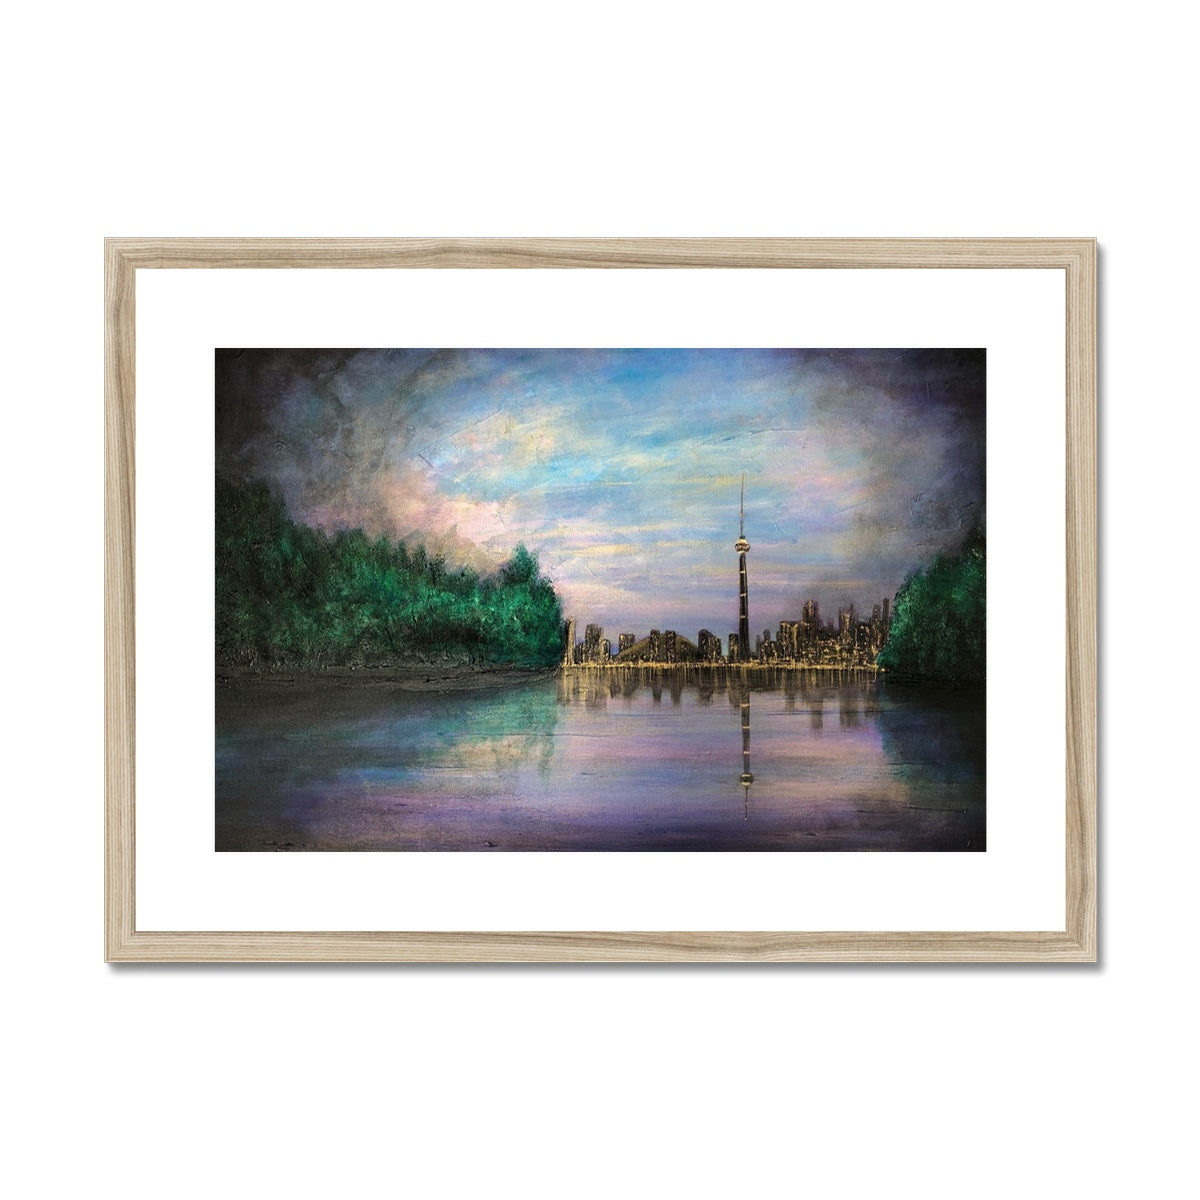 Toronto Last Light Painting | Framed & Mounted Prints From Scotland-Framed & Mounted Prints-World Art Gallery-A2 Landscape-Natural Frame-Paintings, Prints, Homeware, Art Gifts From Scotland By Scottish Artist Kevin Hunter